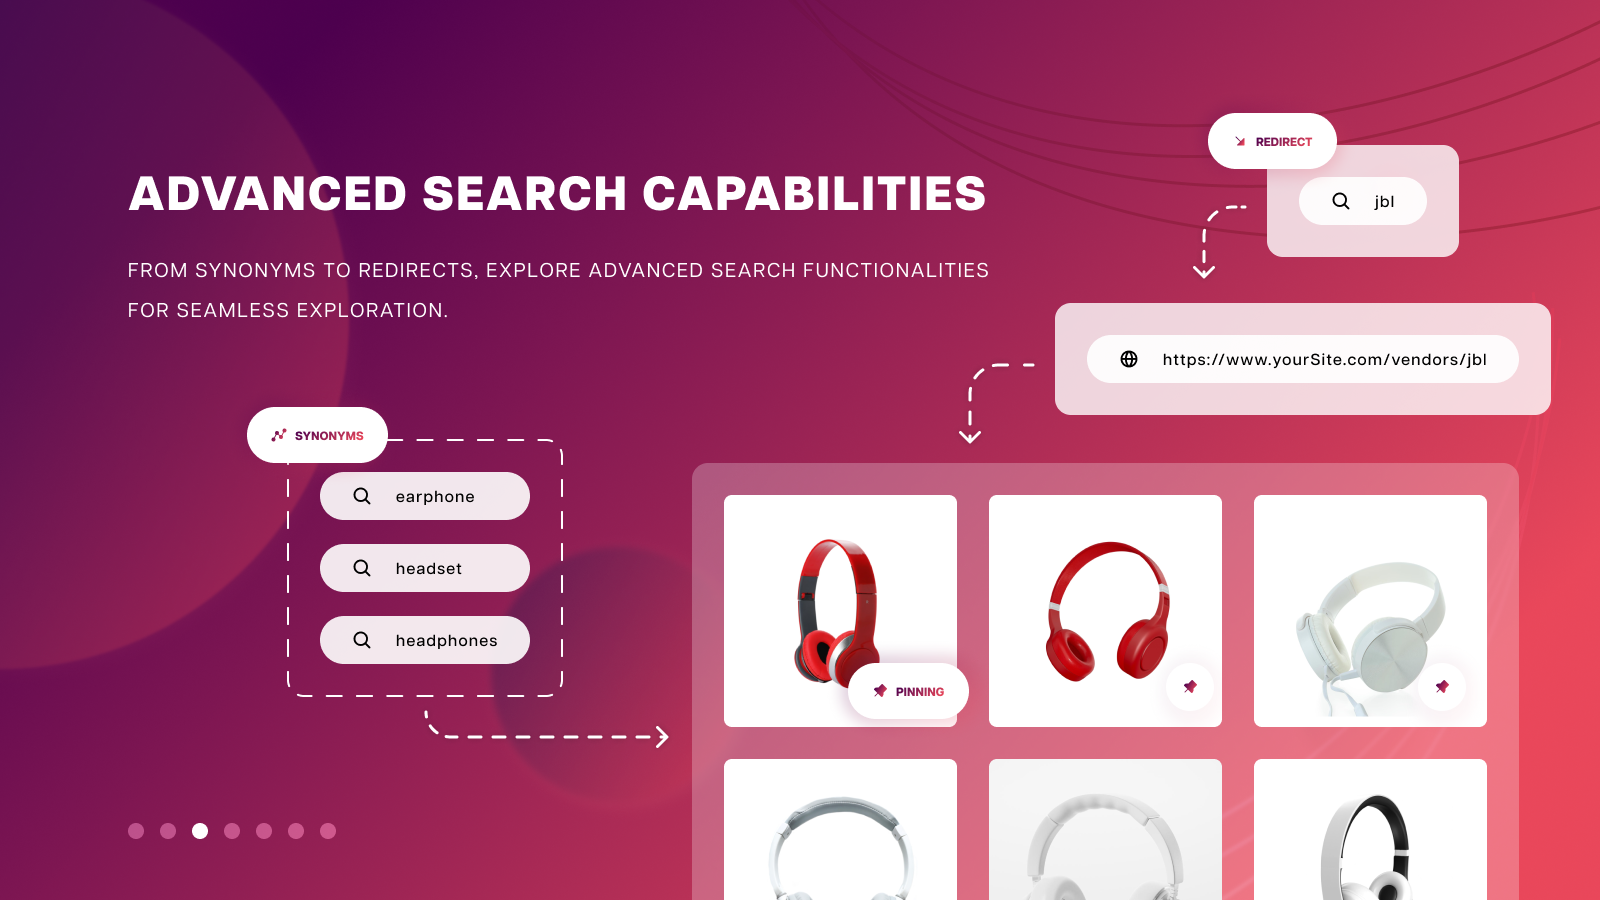 Smart Product Filter & Search Screenshot